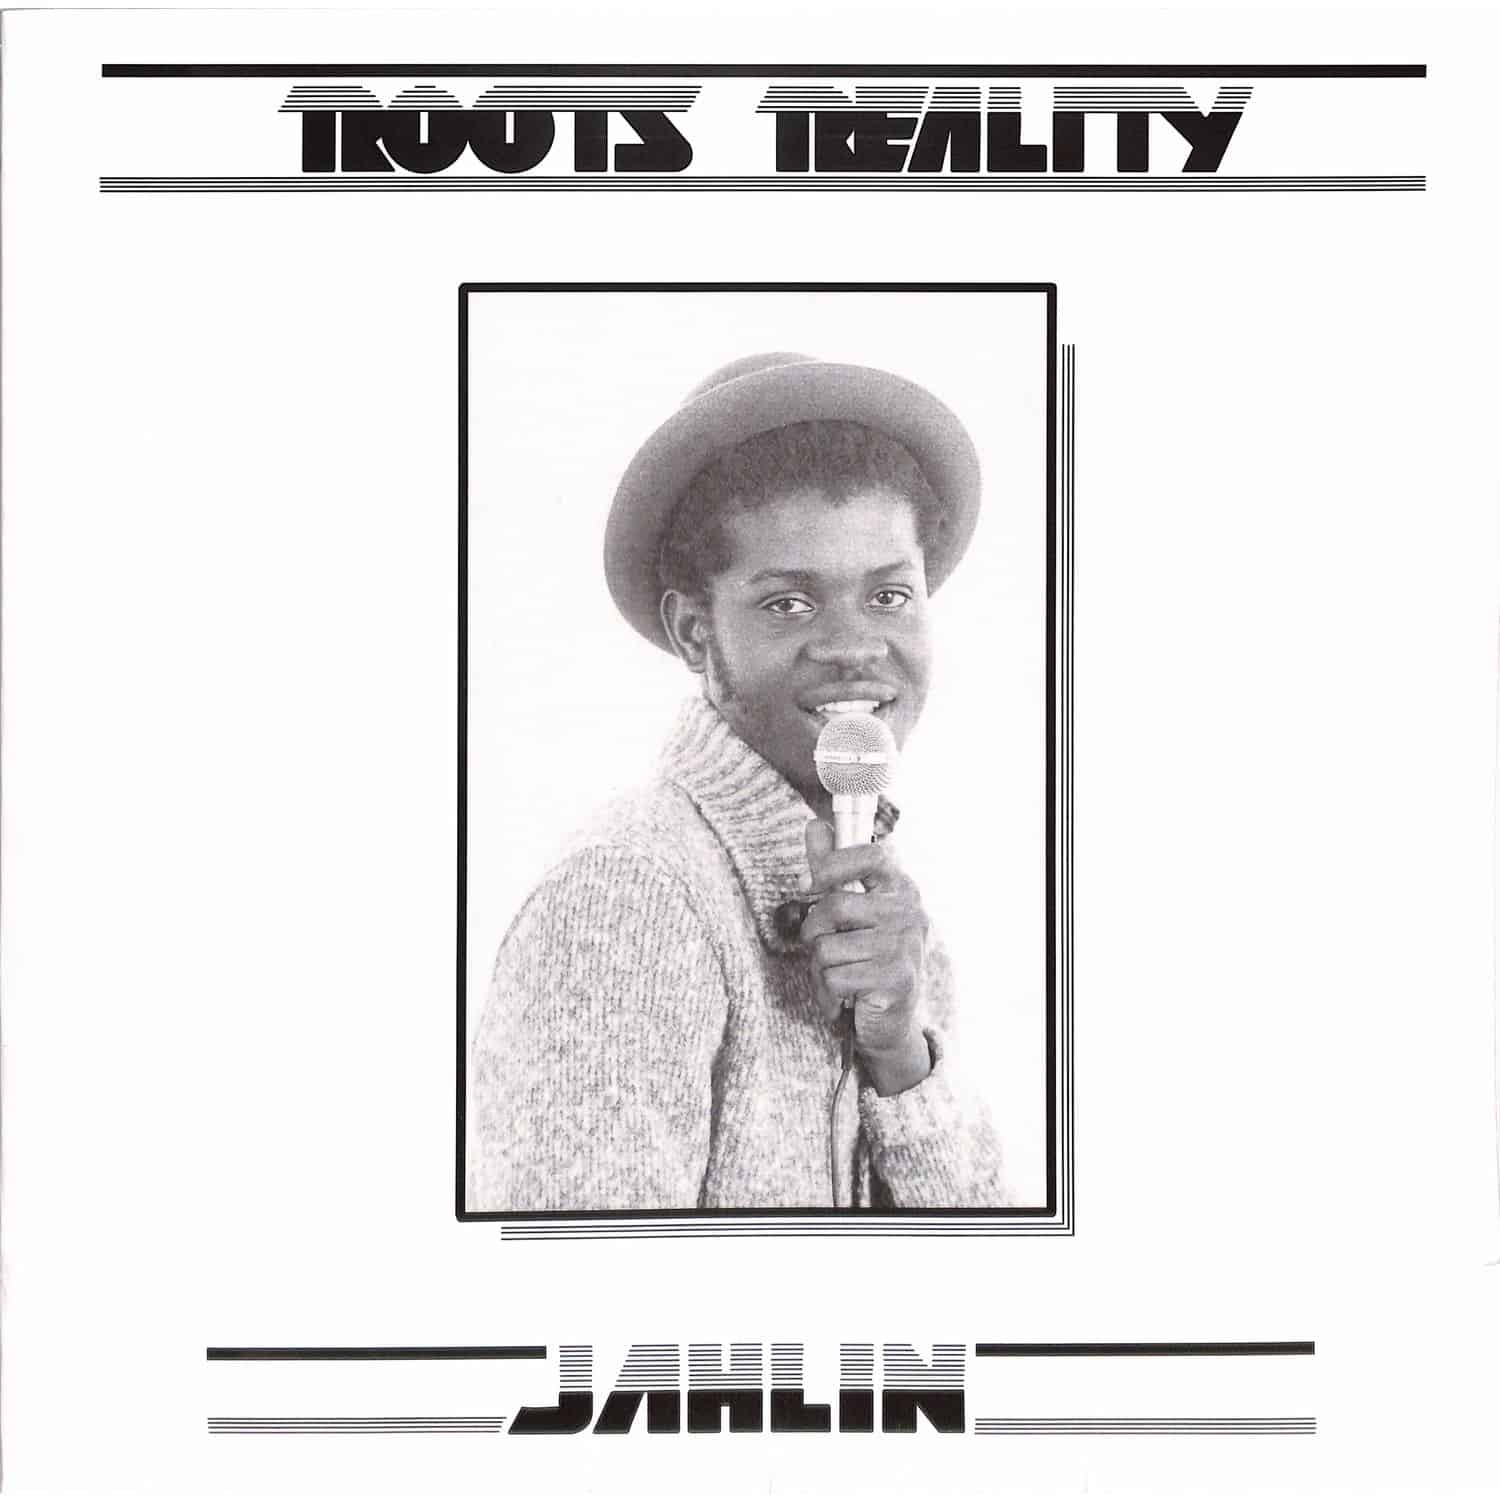 Jahlin - ROOTS REALITY